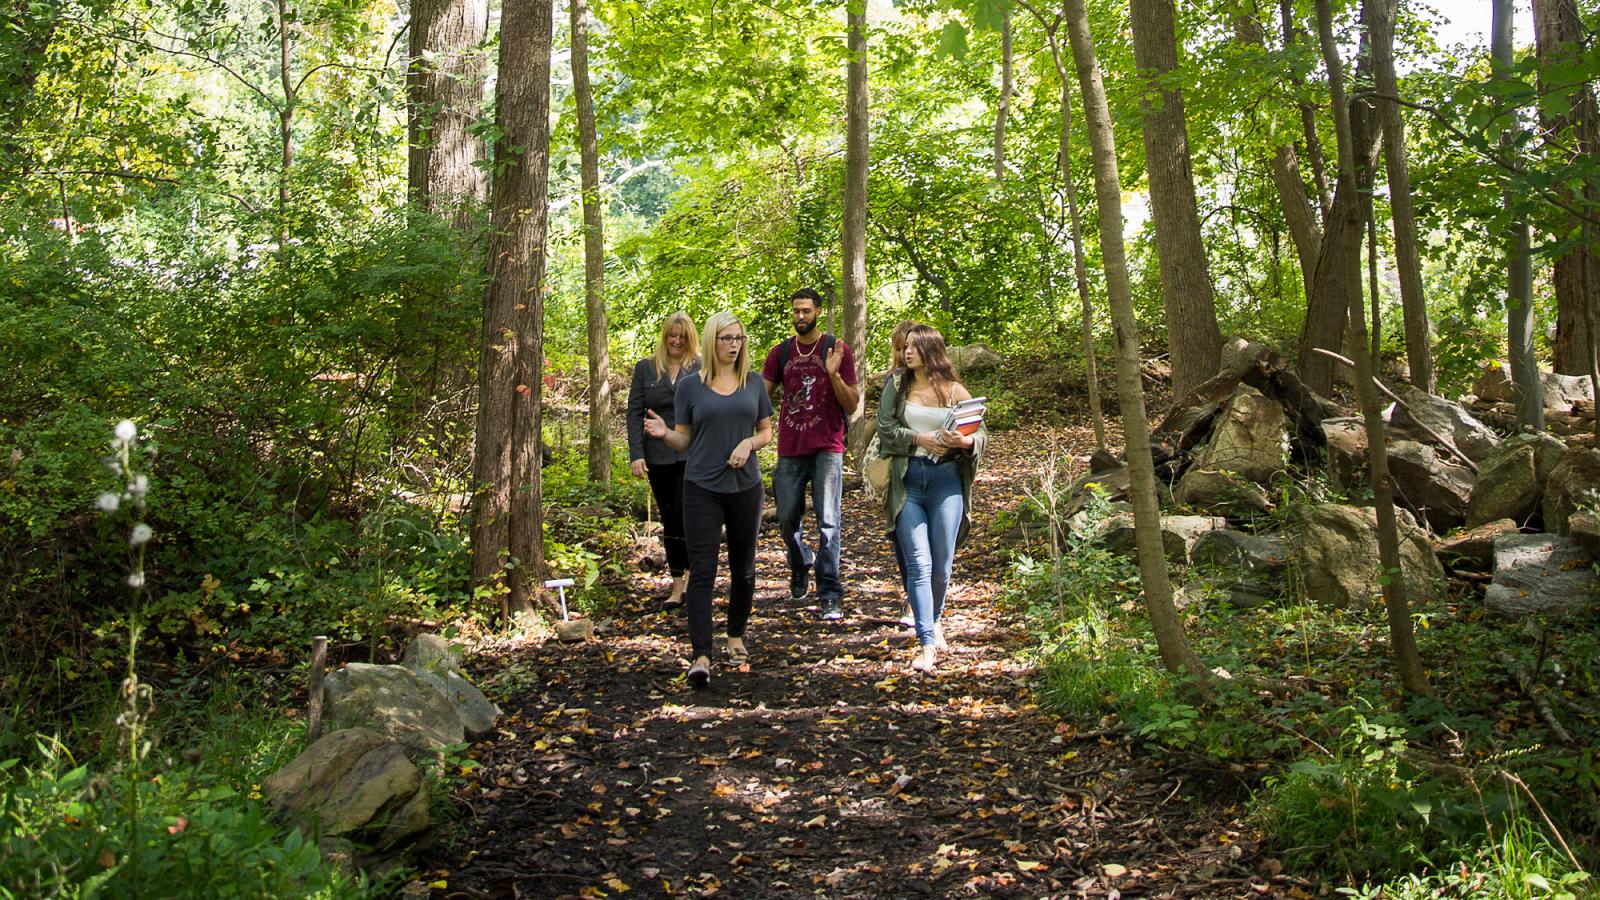 Students walking through Pleasantville wooded area